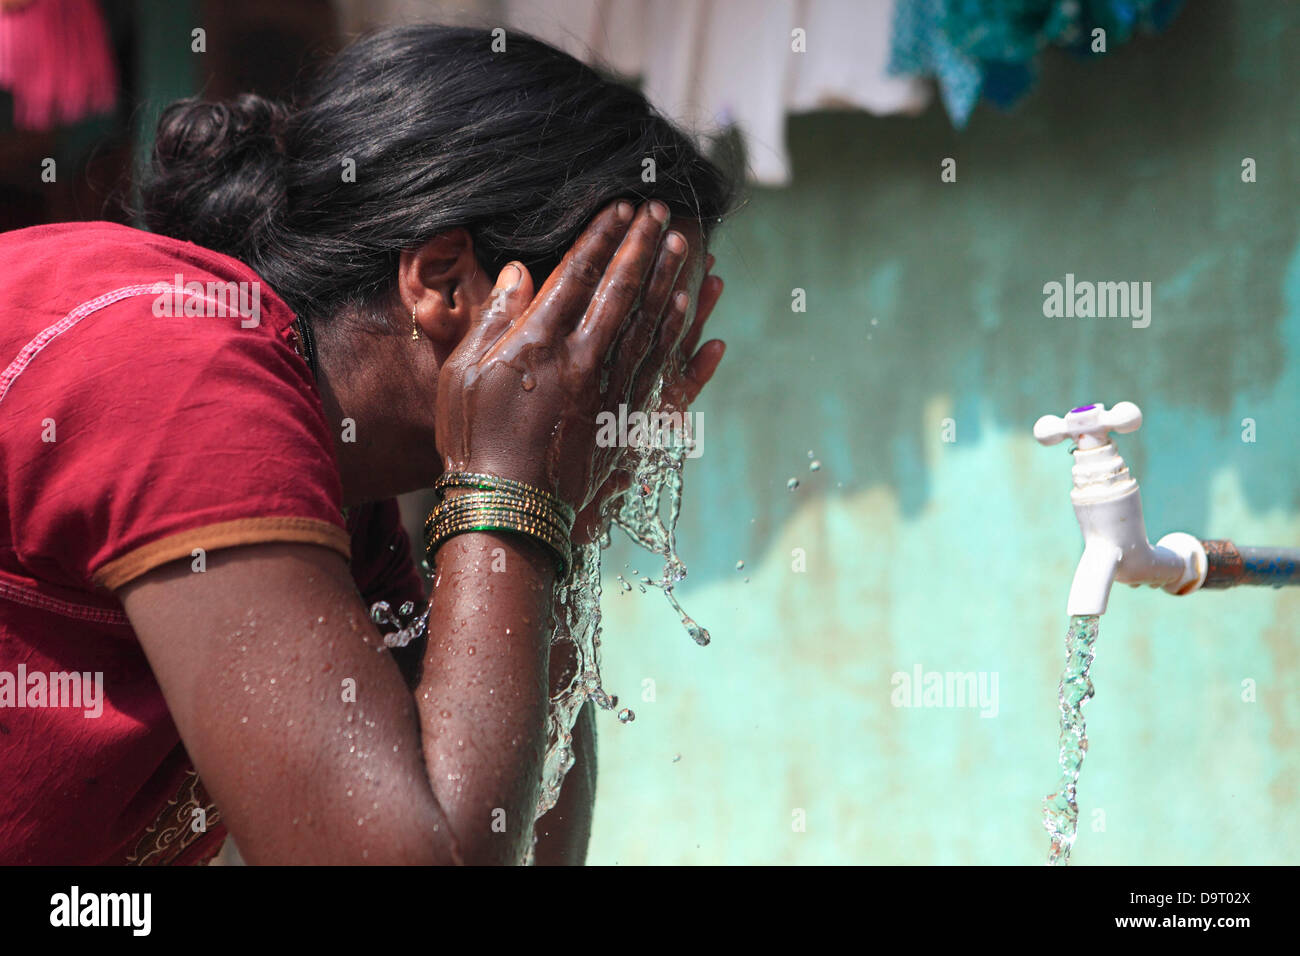 Nov 28, 2012 - Belgaum, Karnataka, India - A woman washes her face in Belgaum where Veolia runs a Pilot project to supply 24 hours tap water to the houses in the slums. Companies are increasingly targeting the Bottom Of Pyramid Markets, the poor, in the developing countries like India to drive future growth and profits. (Credit Image: © Subhash Sharma/ZUMAPRESS.com) Stock Photo